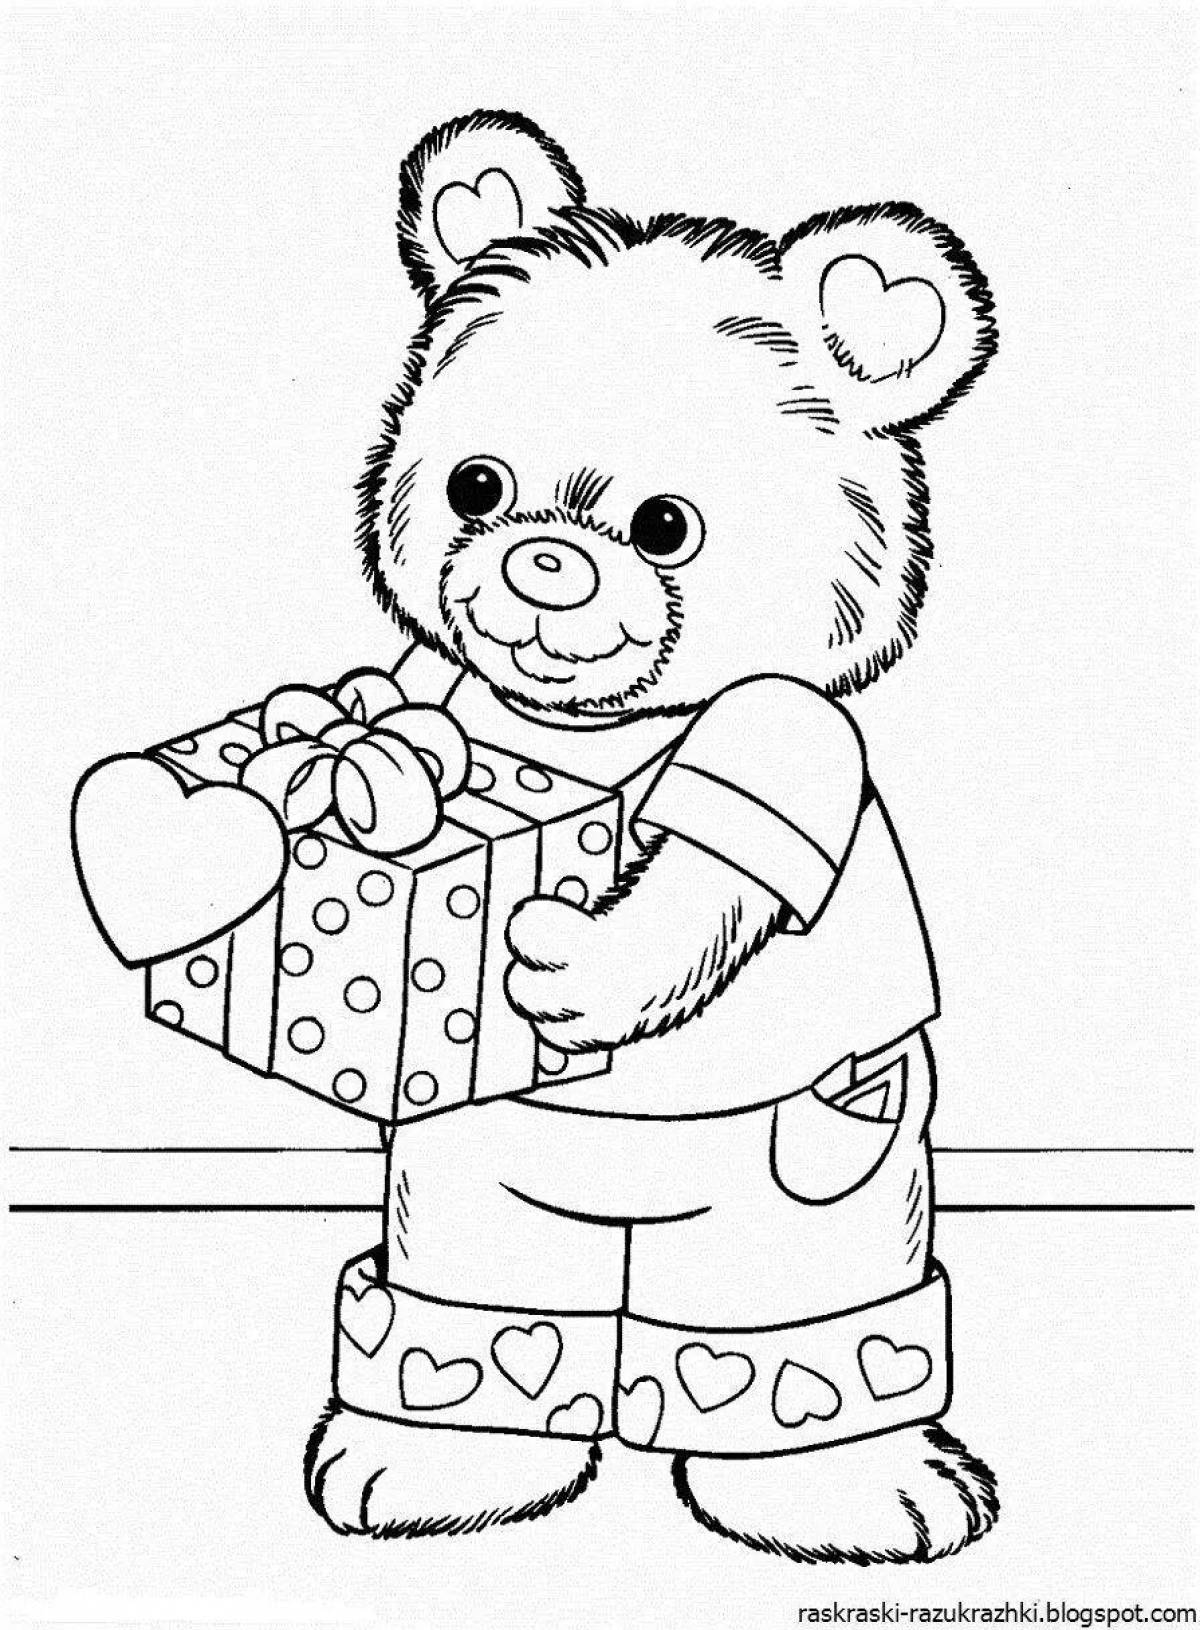 Coloring page friendly teddy bear for girls